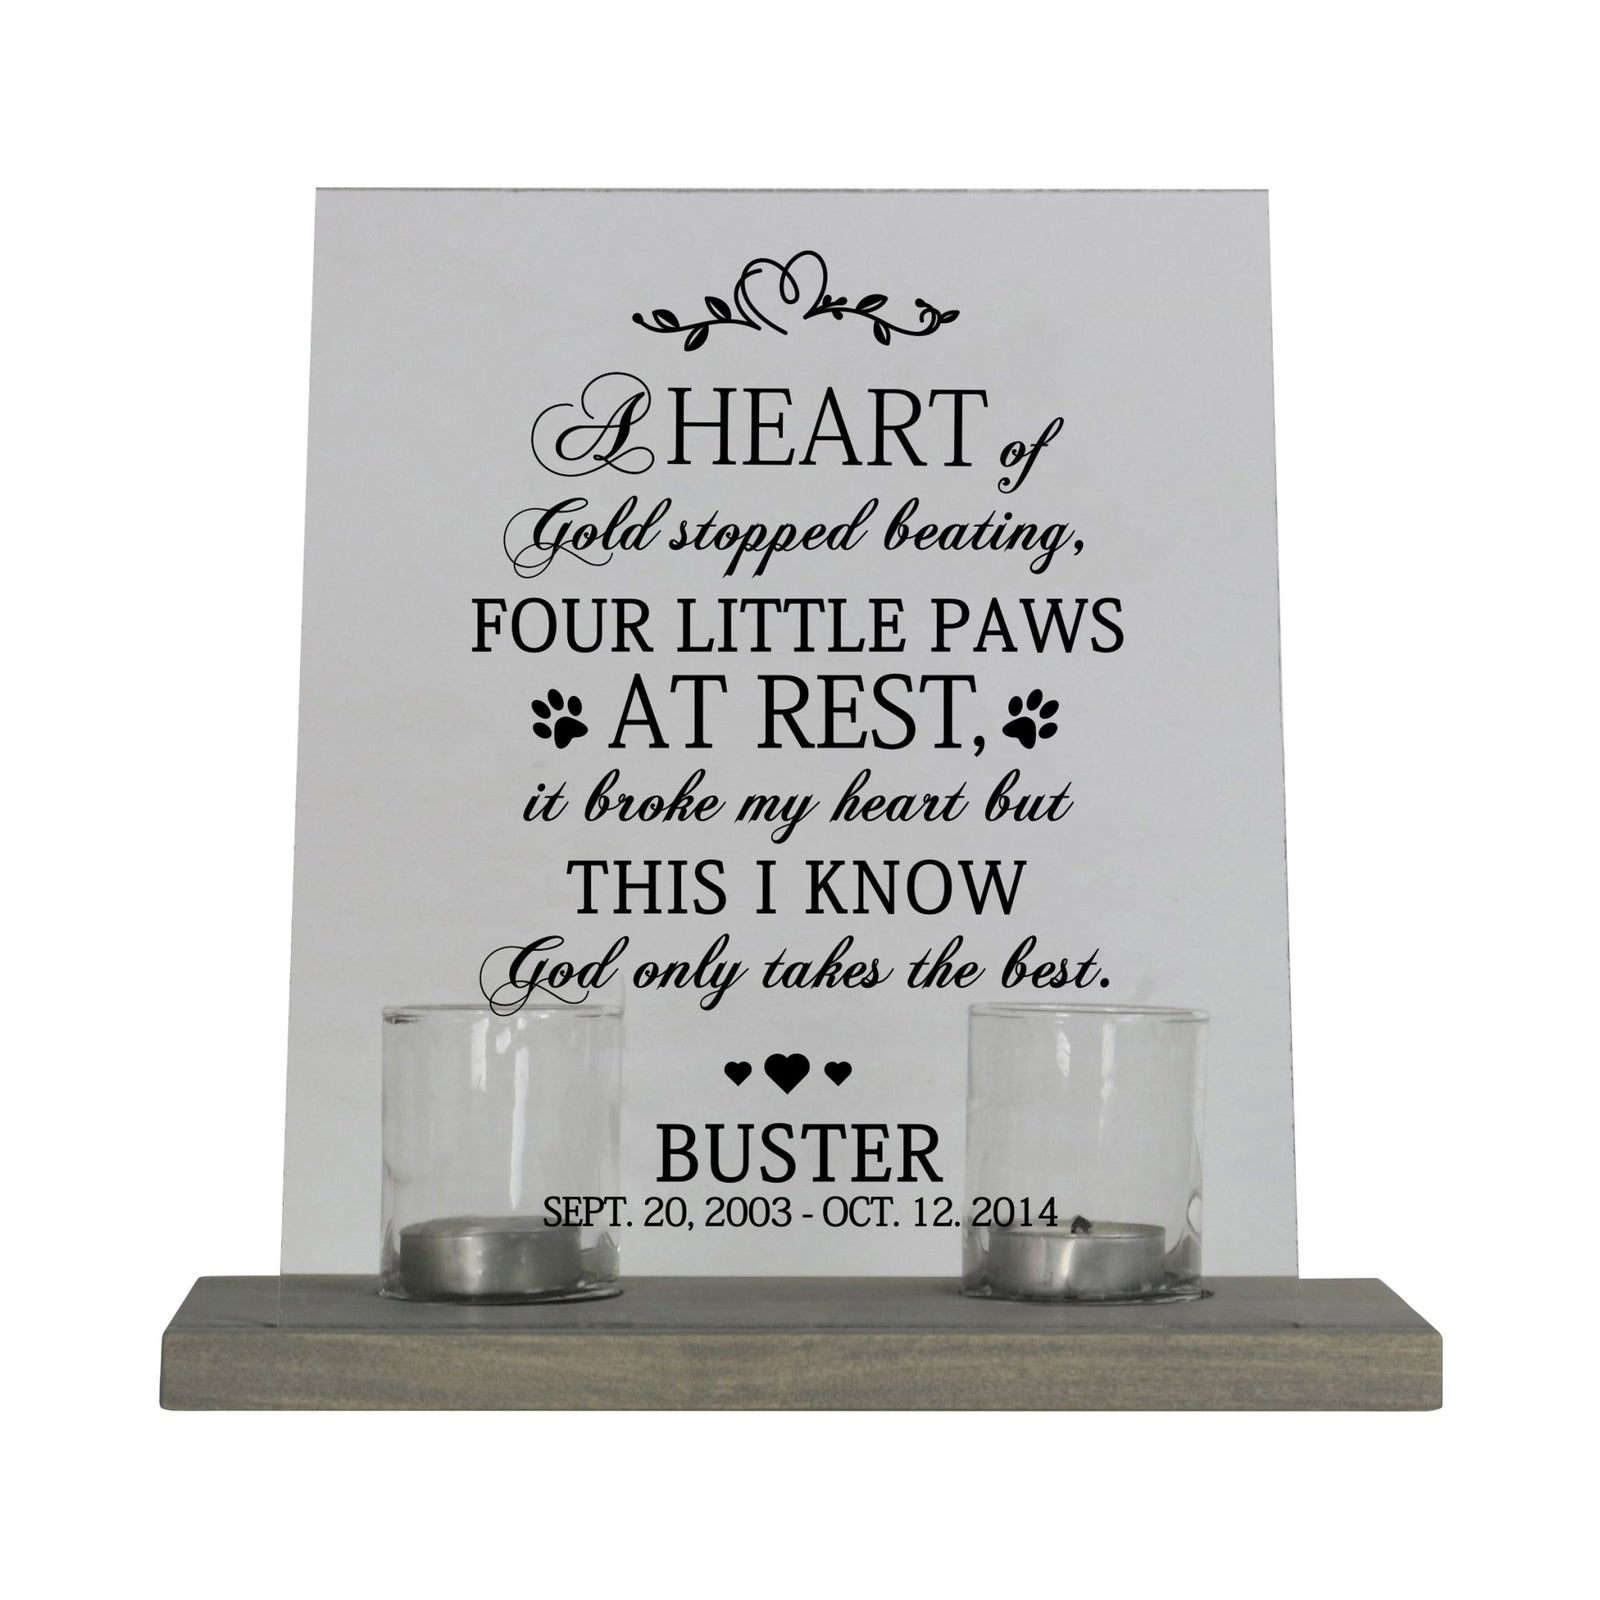 Pet Memorial Acrylic Candle Sign Décor - A Heart of Gold - LifeSong Milestones